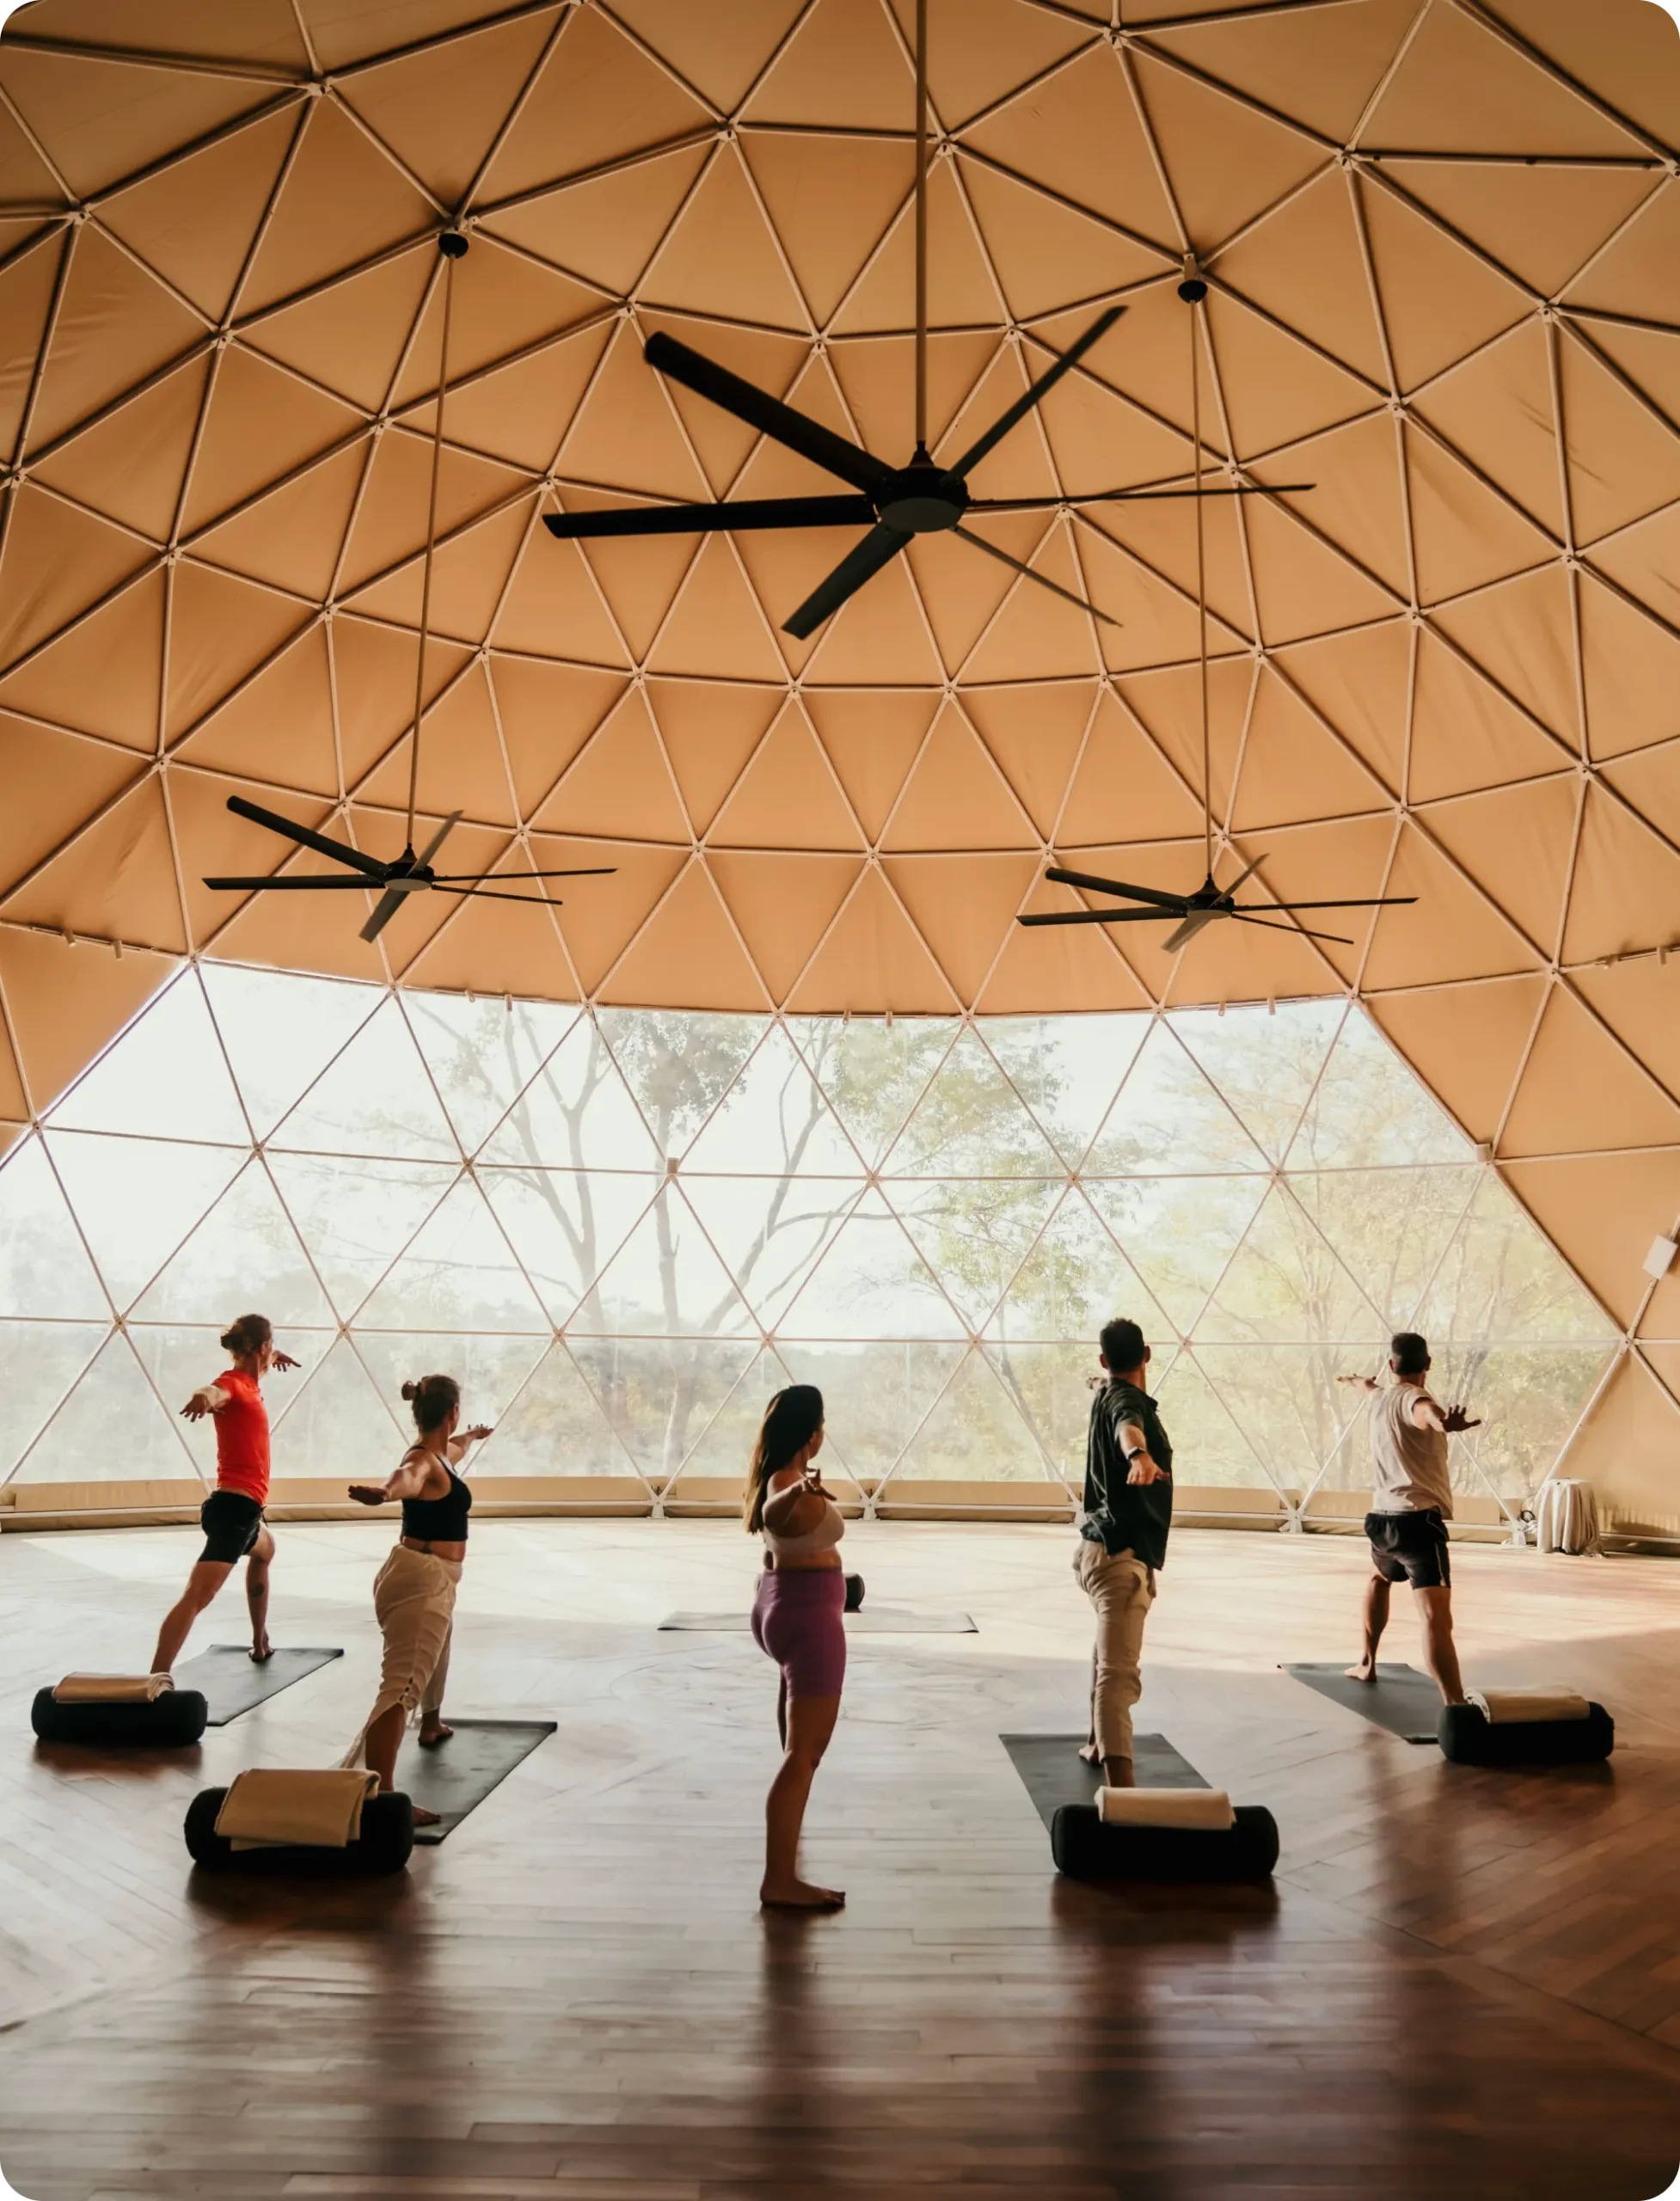 Yoga Activities Inside the Geodesic Dome